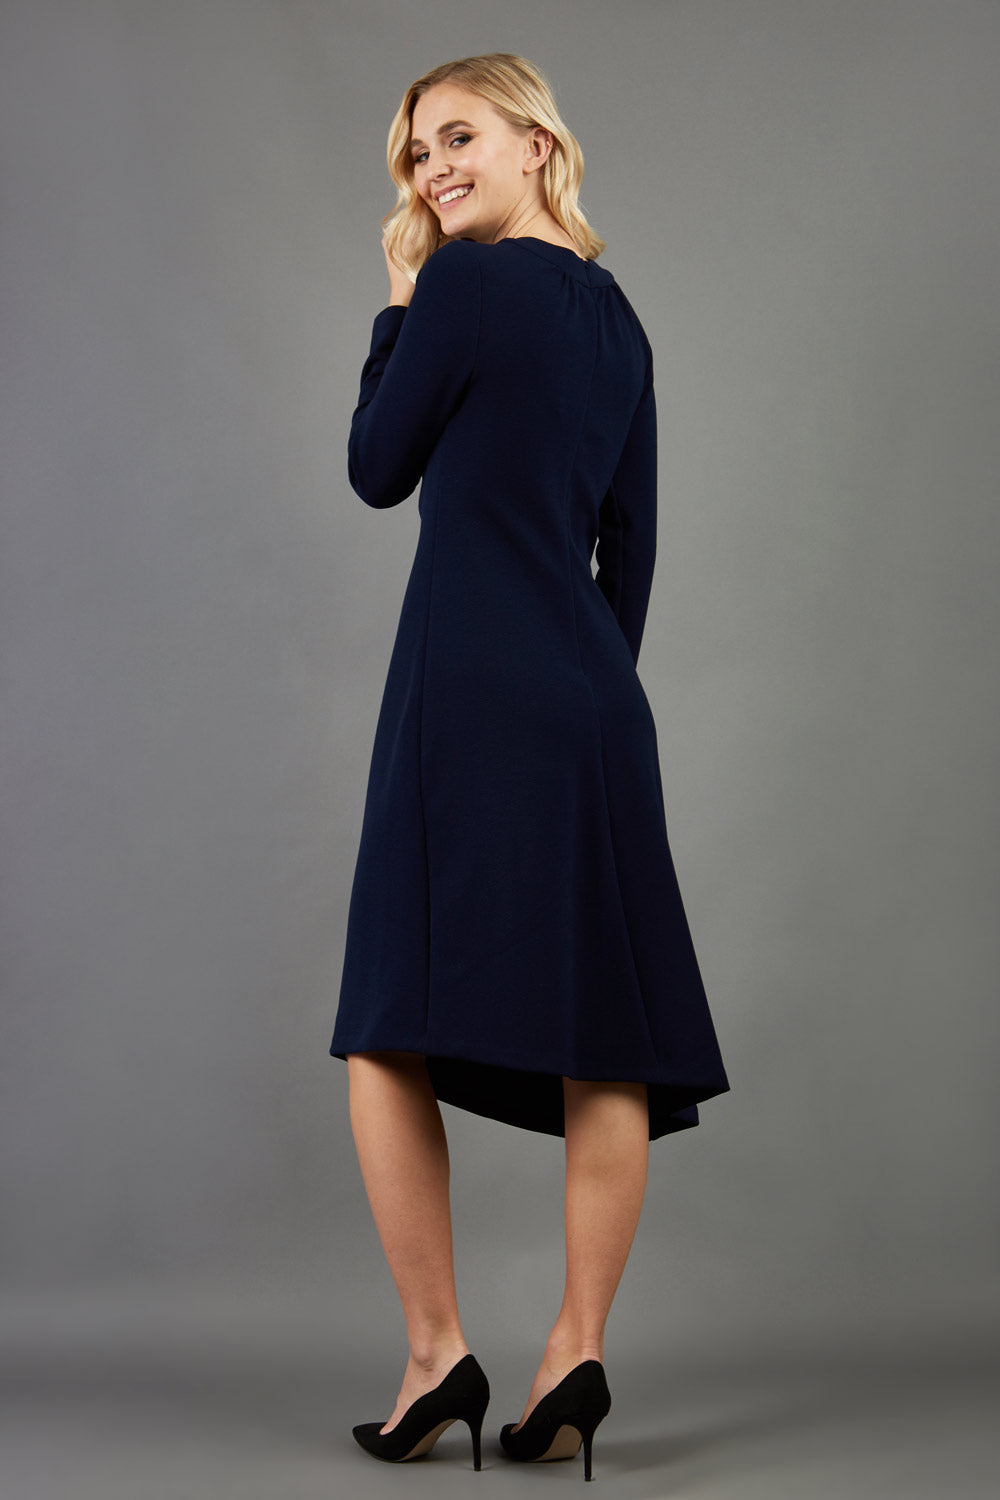 blonde model is wearing diva catwalk dartington asymmetric skirt midaxi long sleeve dress with rounded pleated neckline a-line style in navy blue back